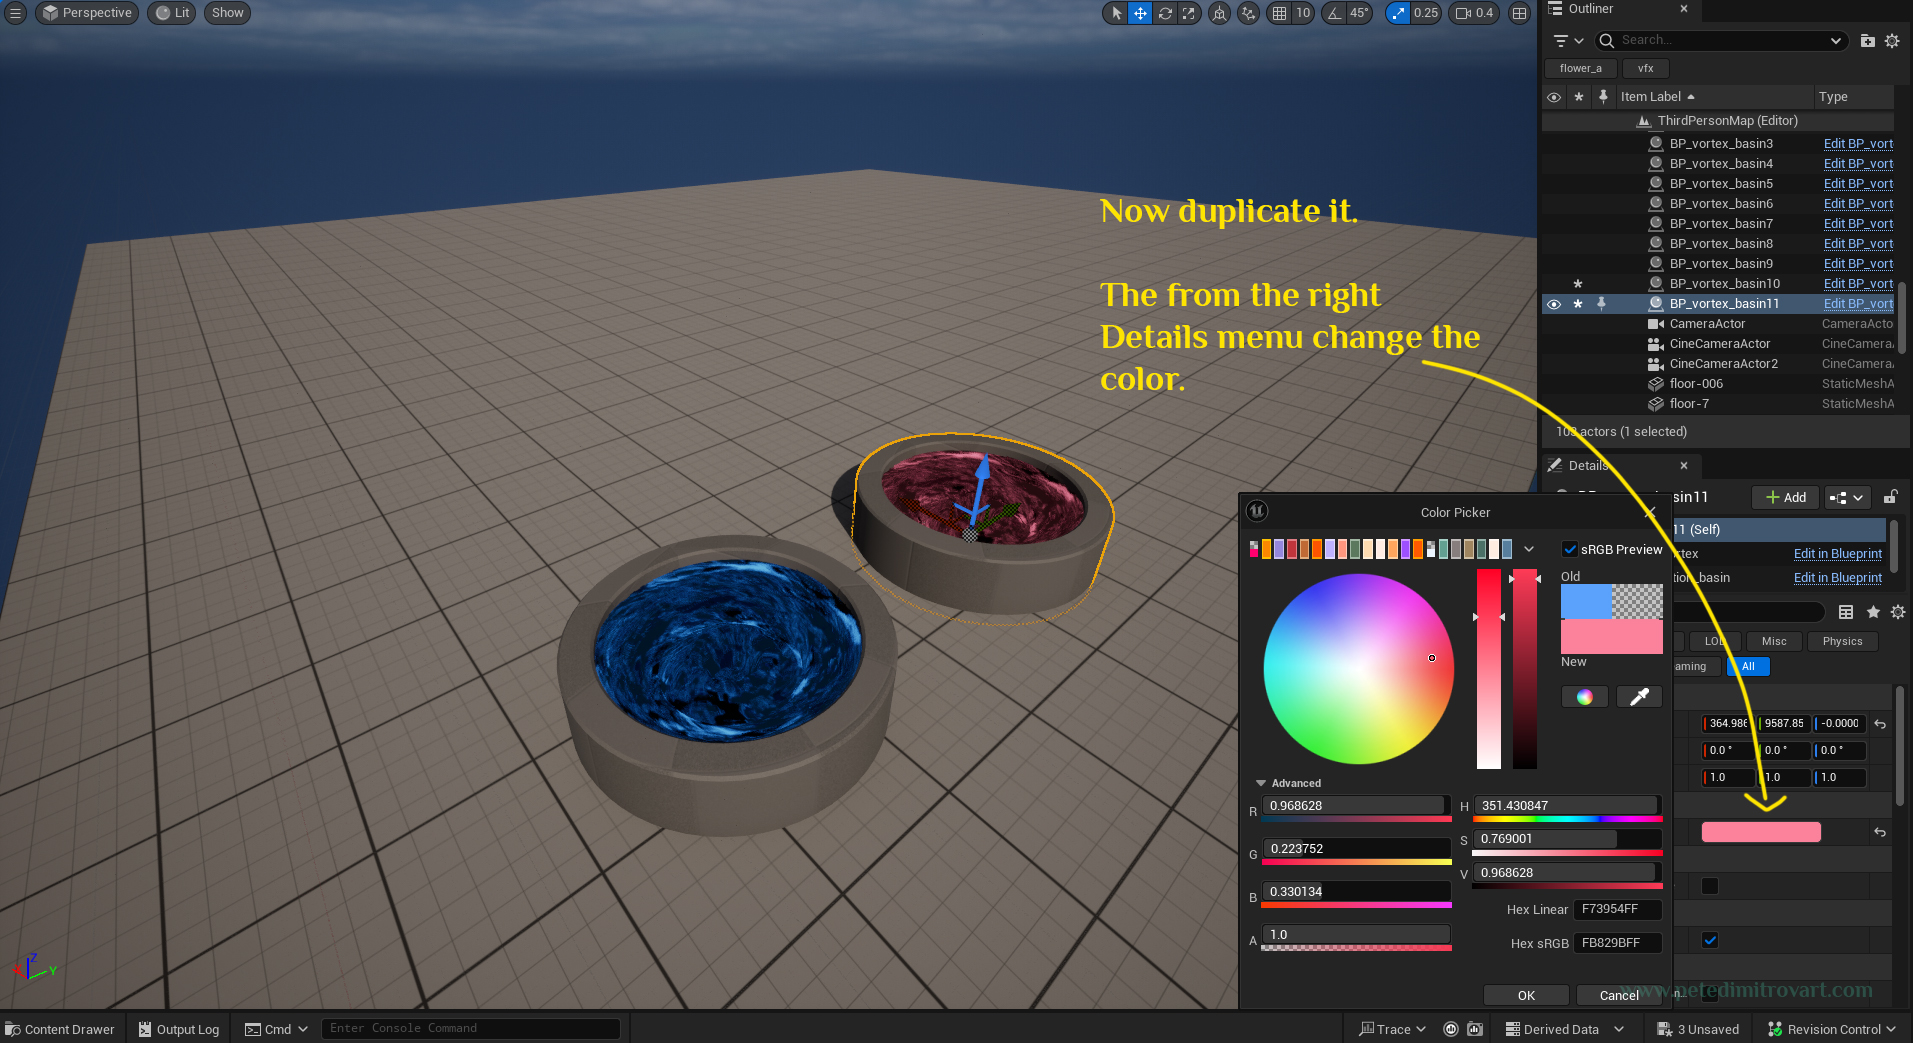 Image that has identical to before subject and angle. Now next to the blue vortex blueprint that is out in the world, there is a secondary one. This secondary one has its Base Color blueprint variable changed to a pink, red color. That is reflected in the world too, where the material instance used on that dynamically has changed to the same shade of red.